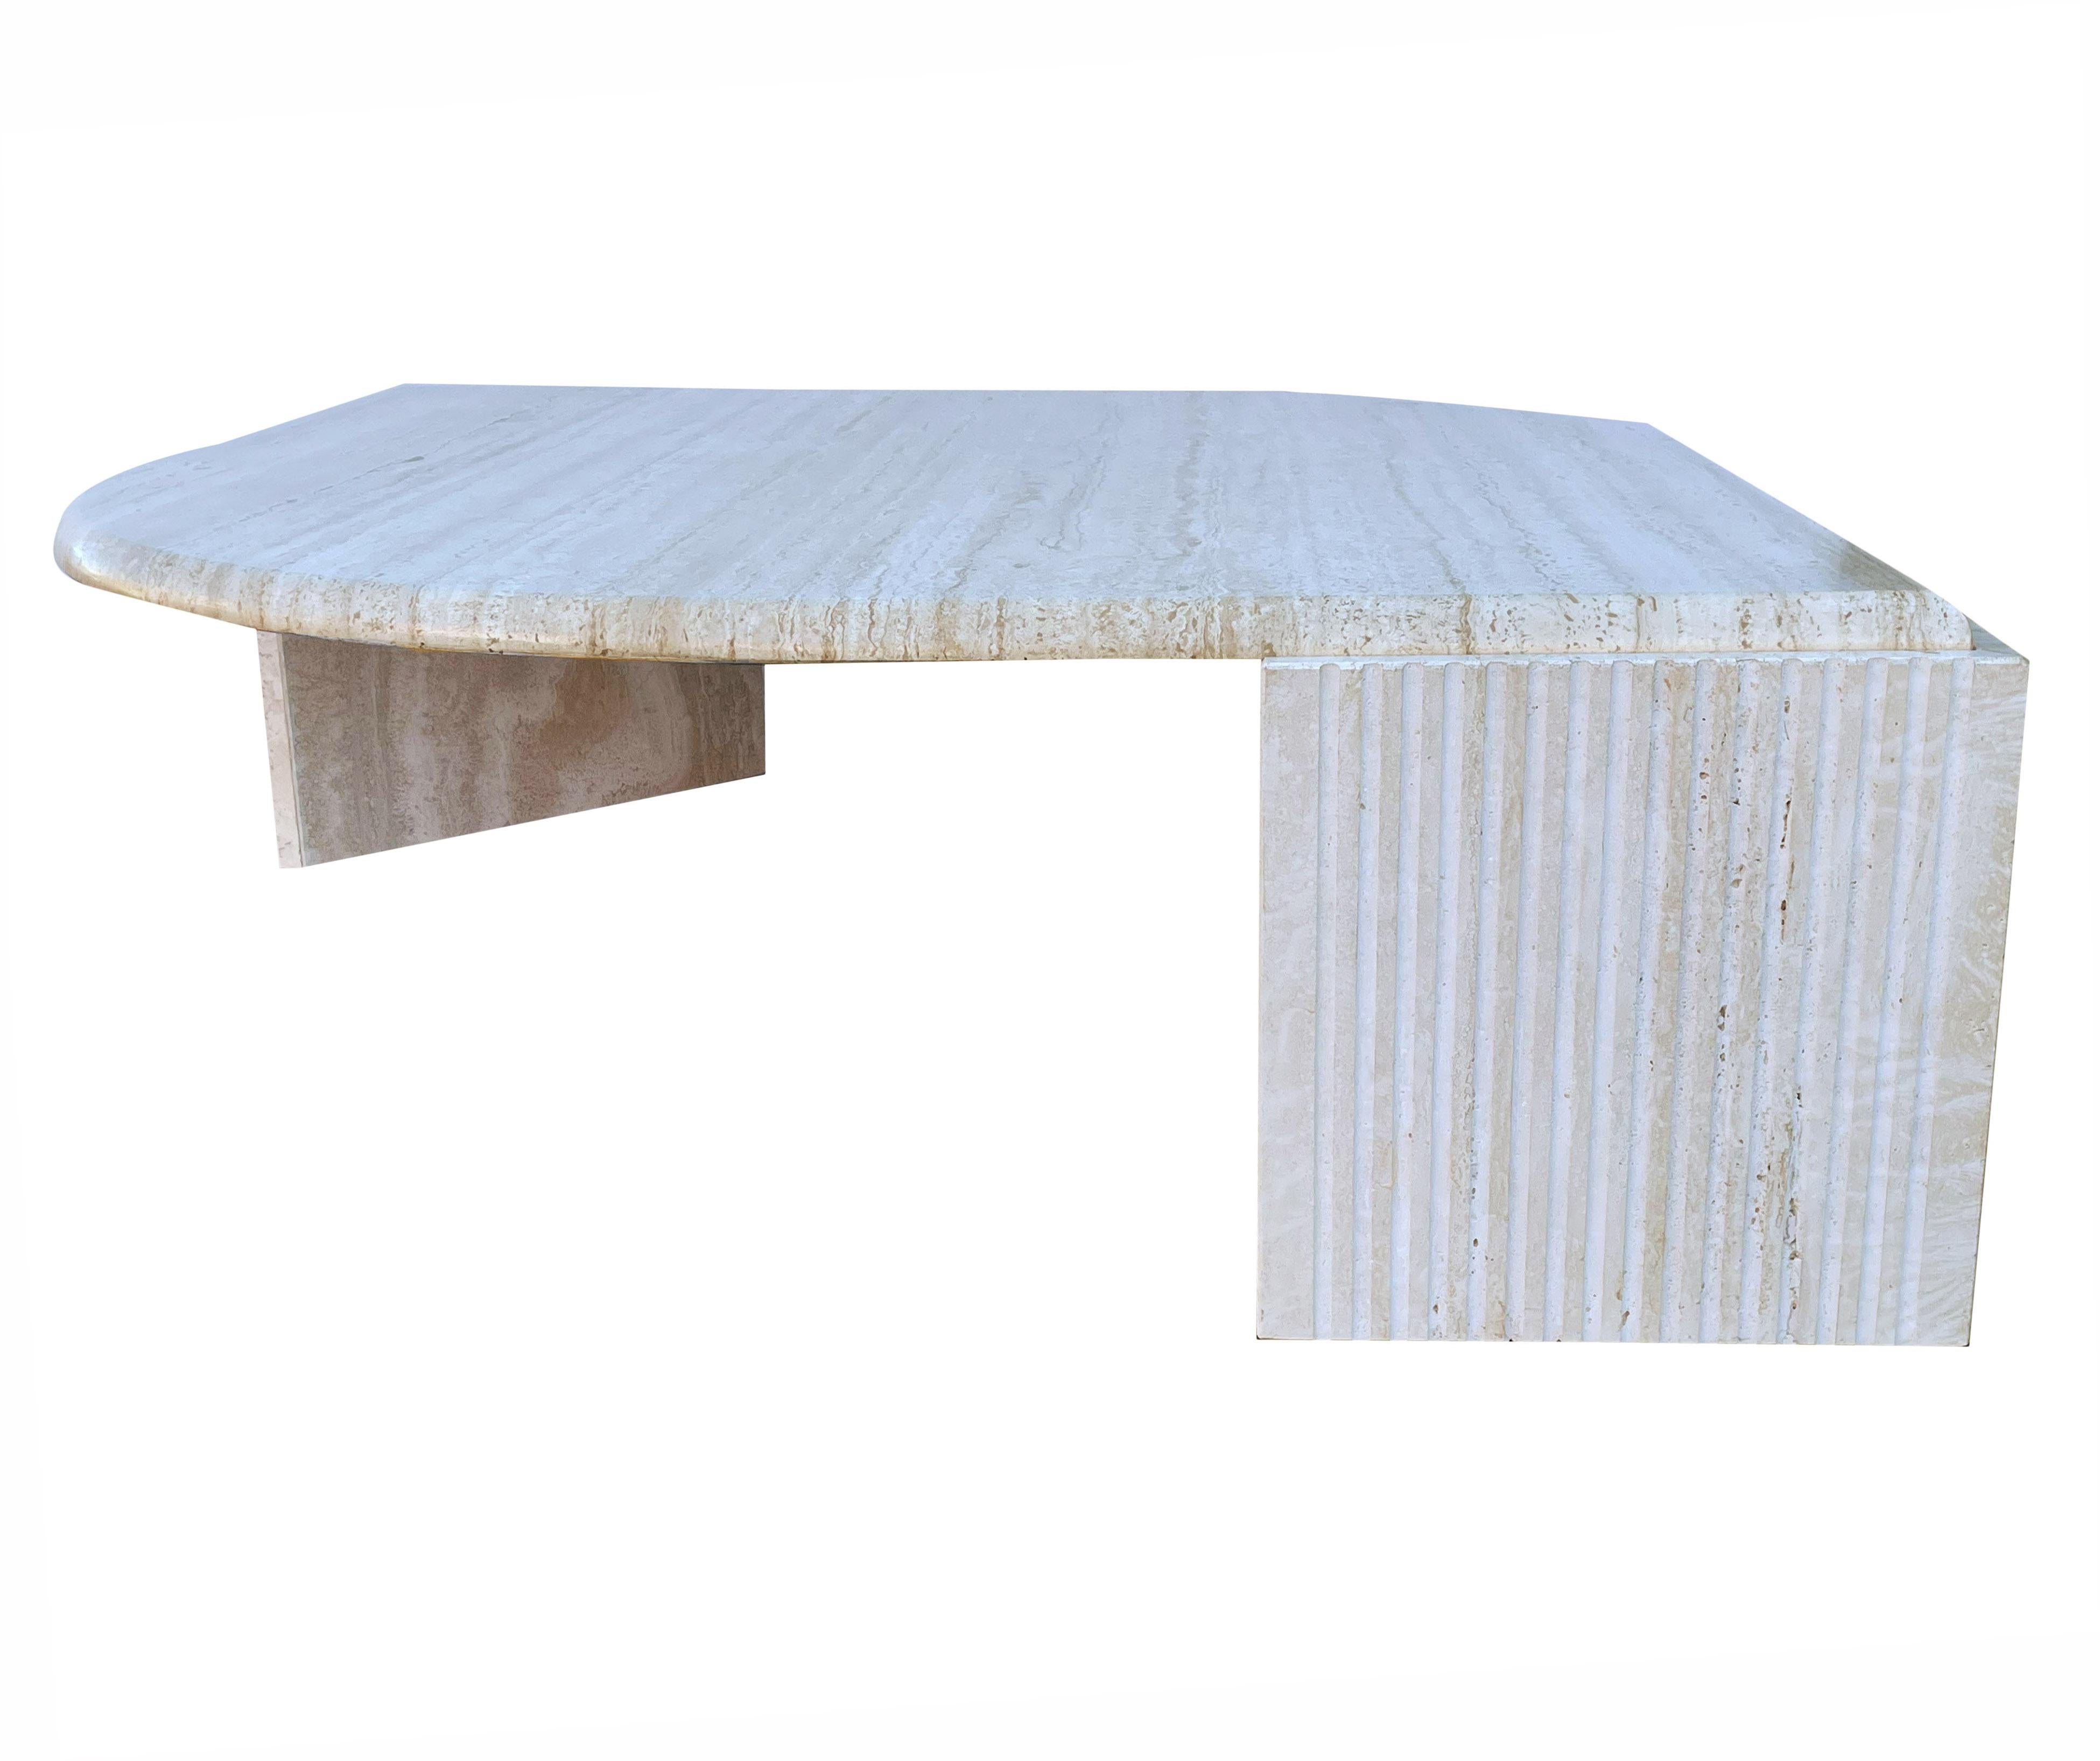 A larger scale and substantial cocktail table from Italy, circa 1980s. The piece is constructed of two base parts with a large honed travertine top. In excellent overall condition.